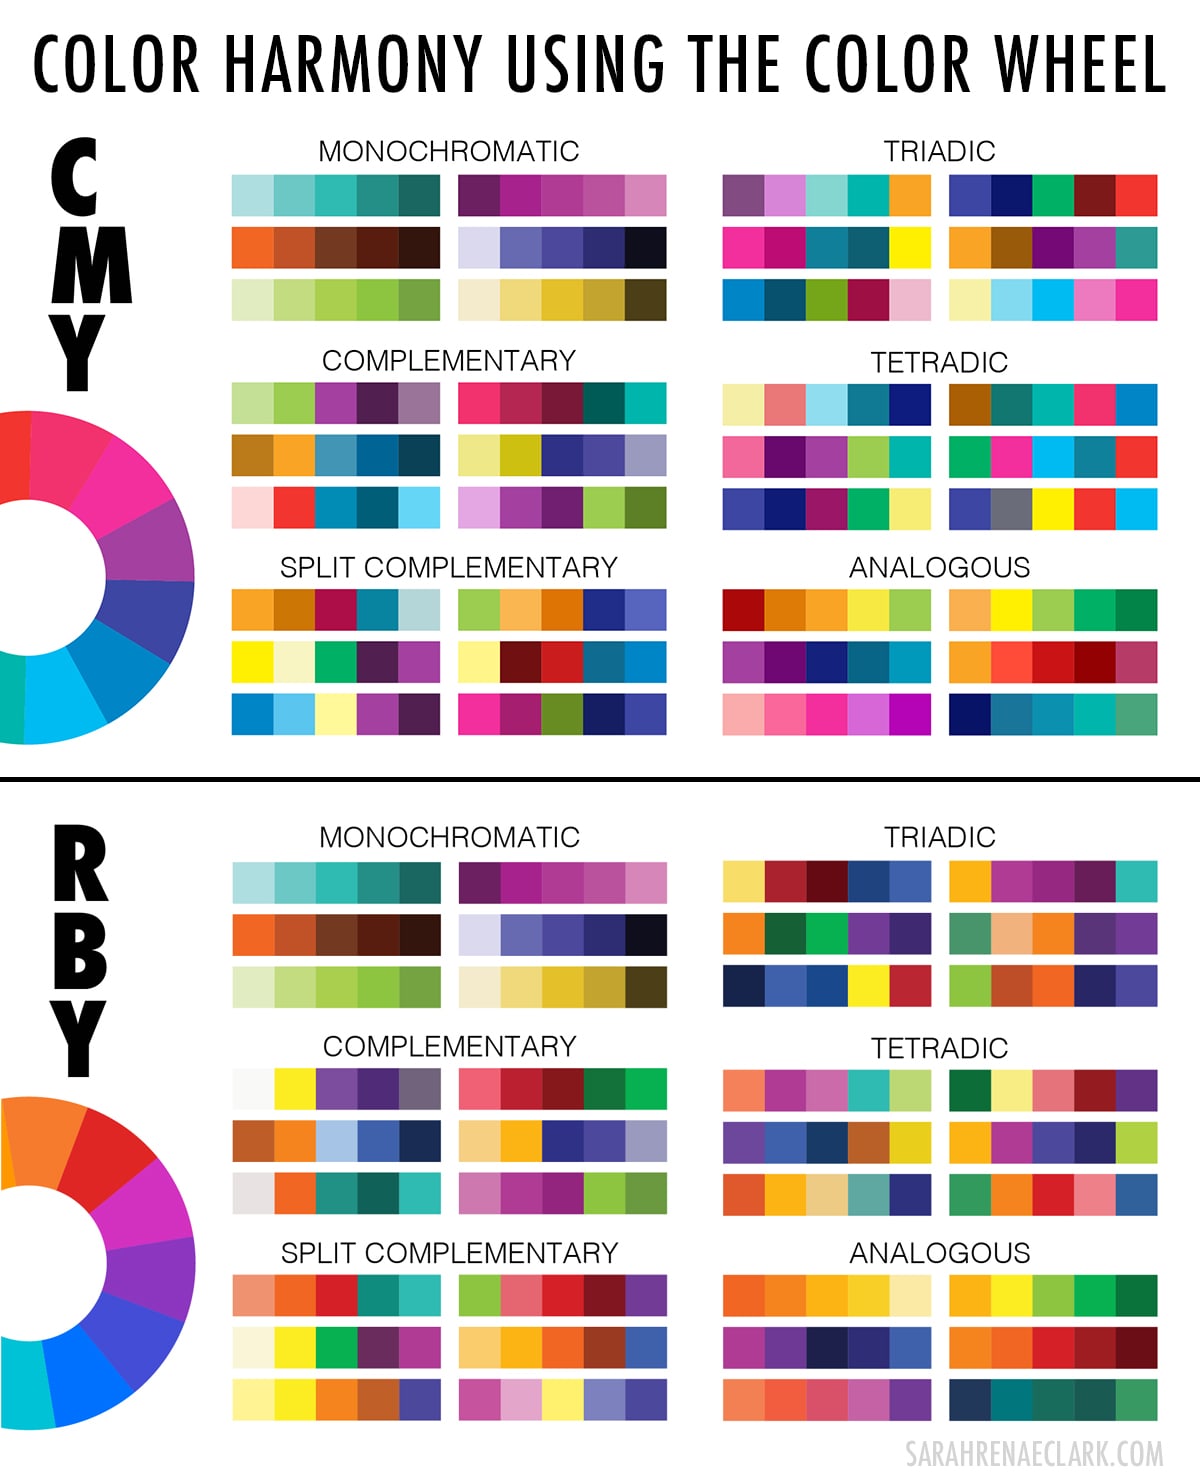 Advanced Color Theory: Color Wheels, Impossible Colors, & the